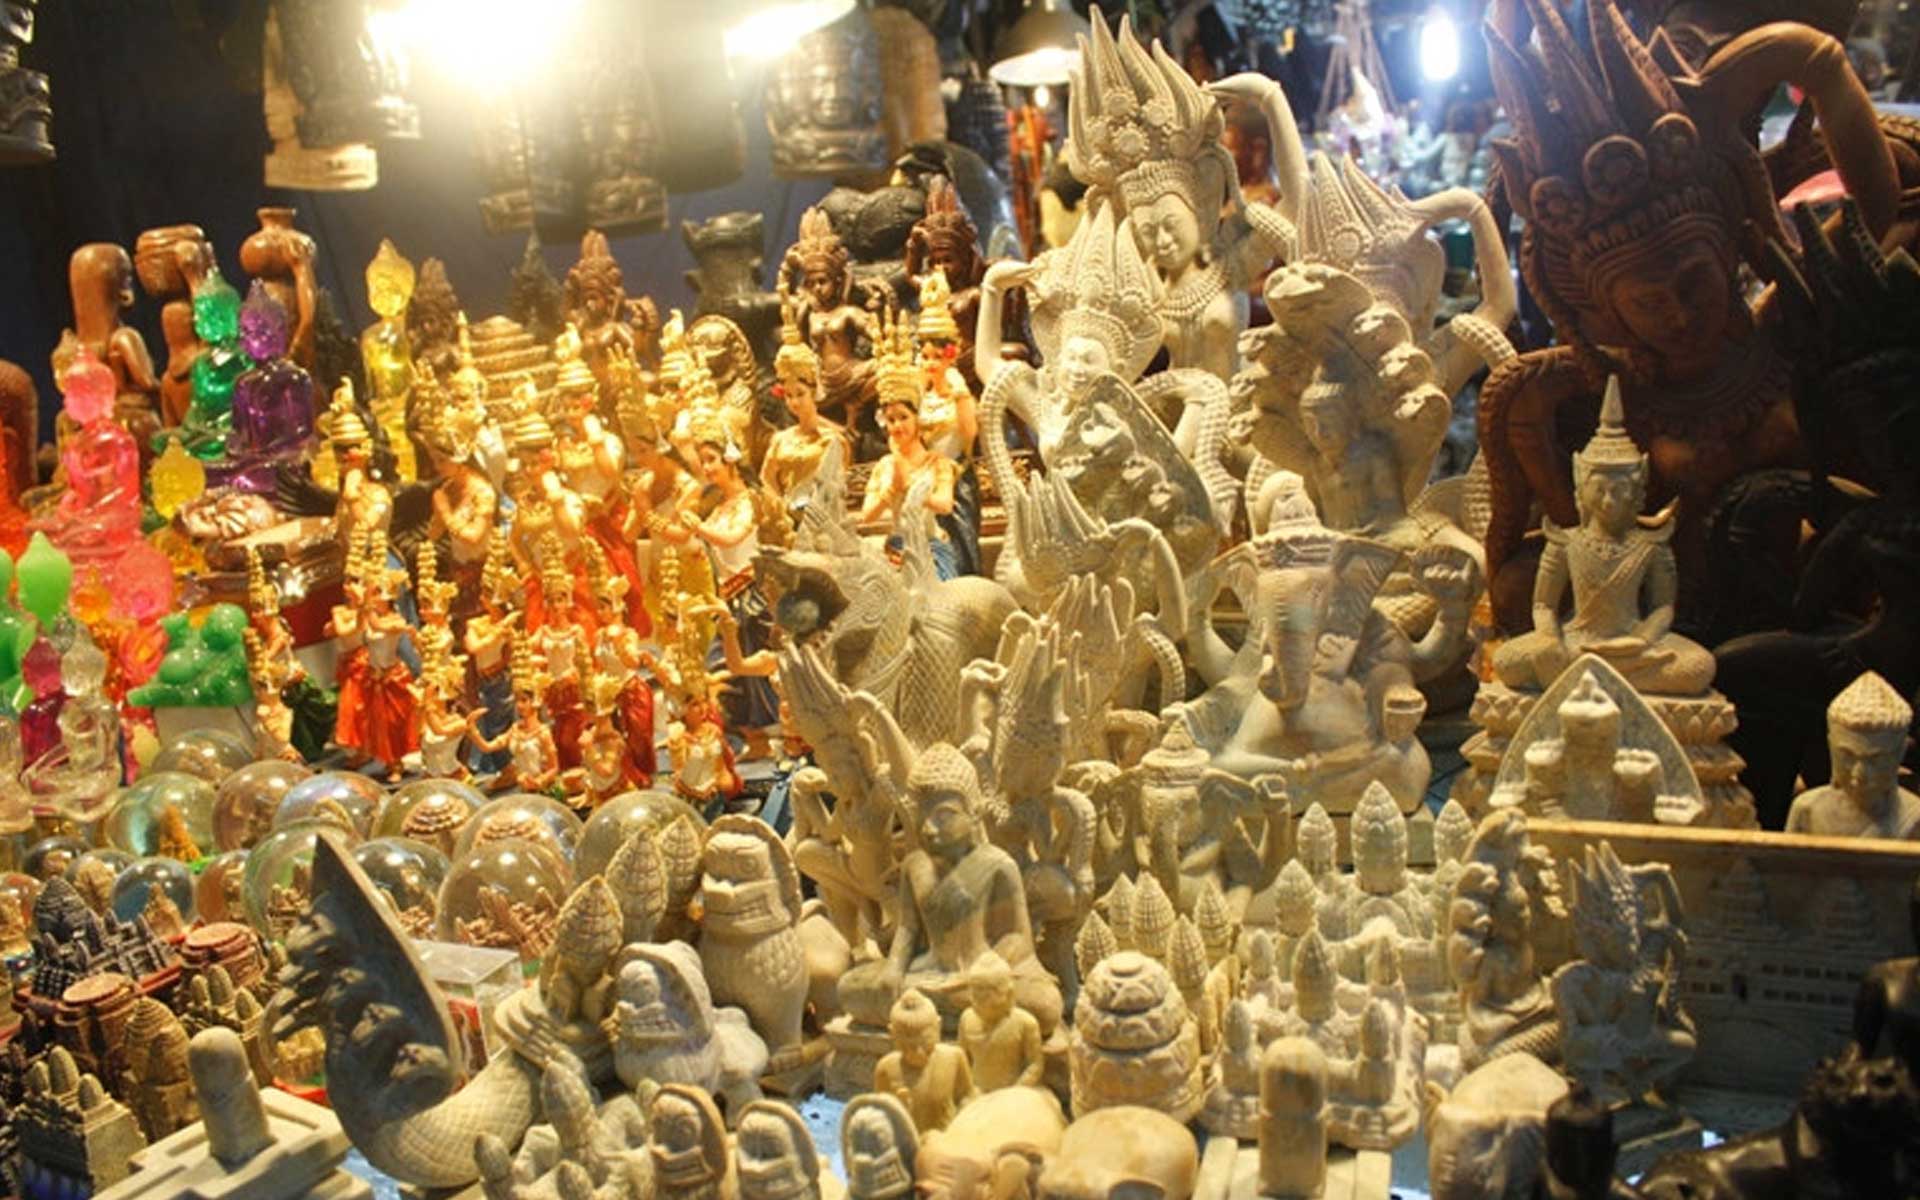 Sculpture Reproductions - Gifts to Buy in Cambodia